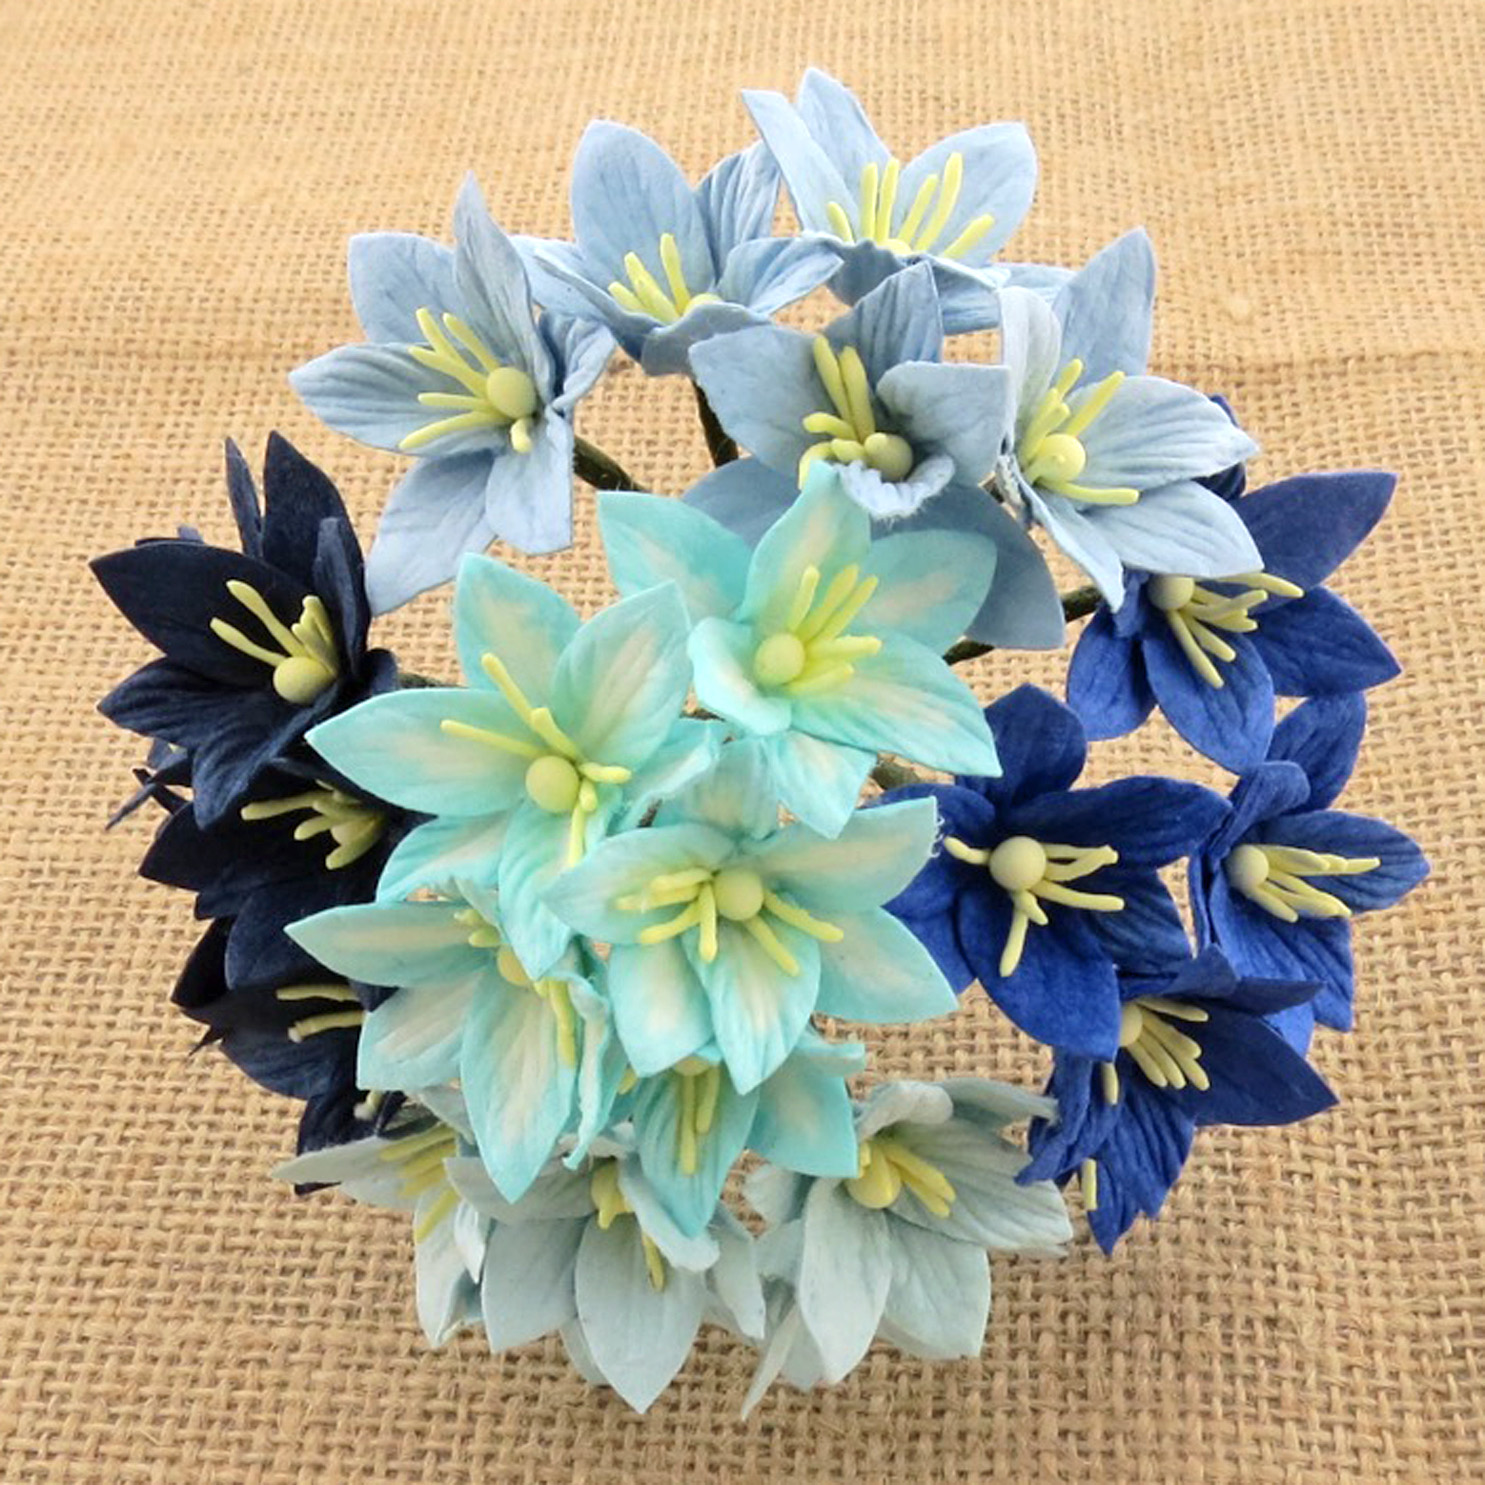 50 MIXED BLUE MULBERRY PAPER LILY FLOWERS - 5 COLOR